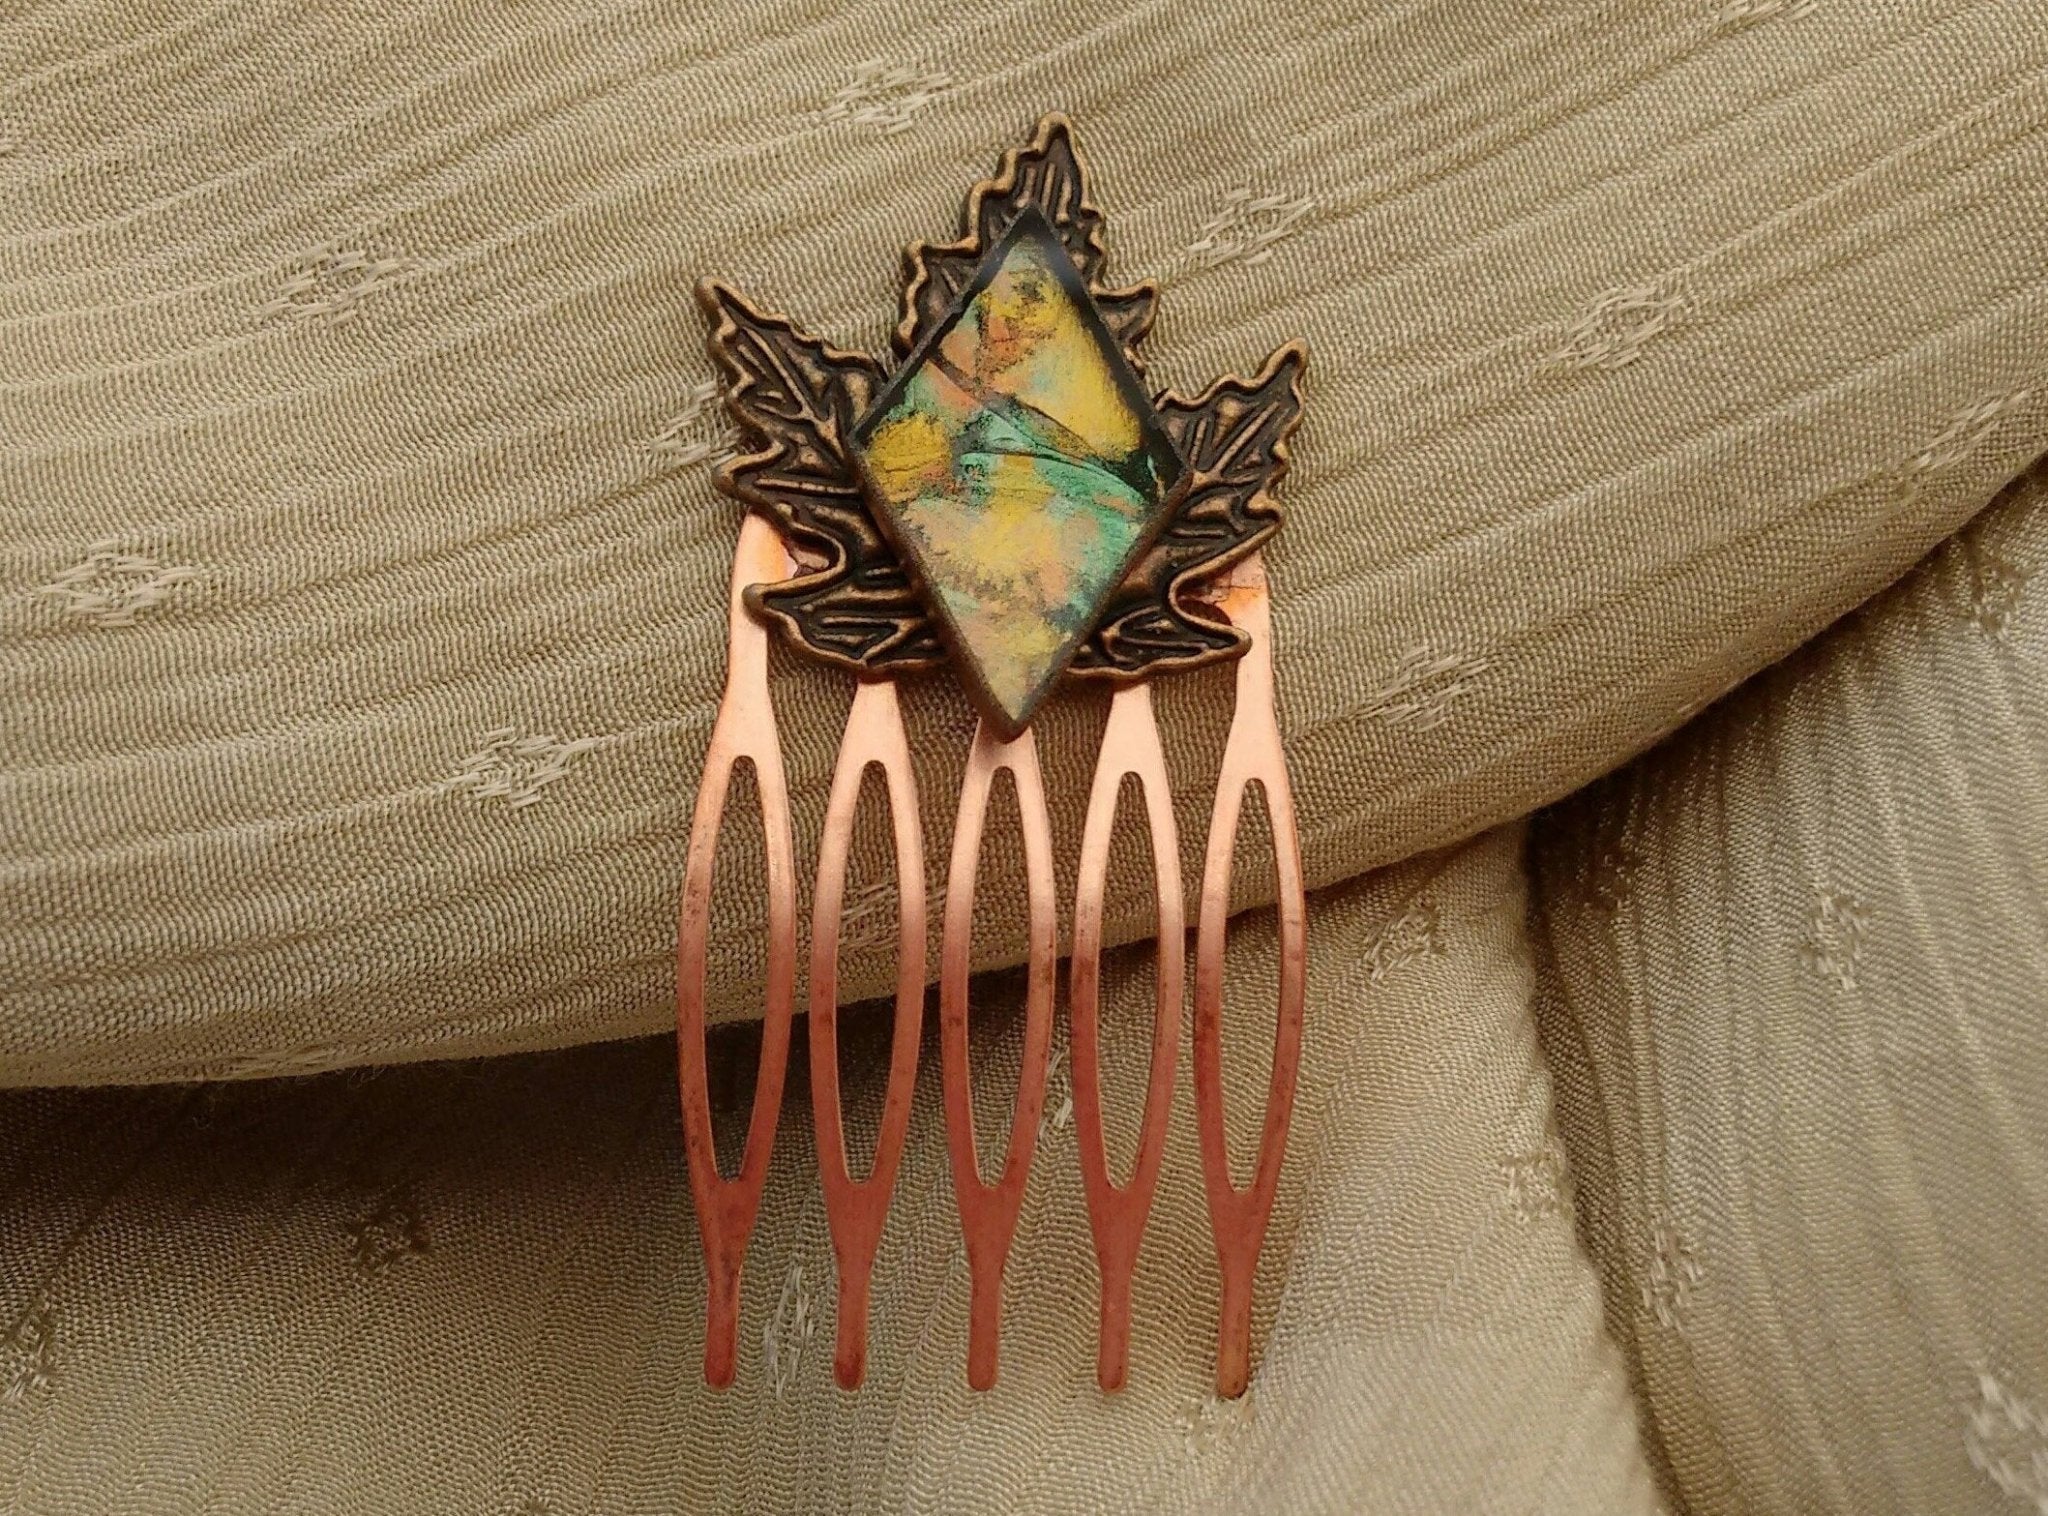 Handcrafted copper leaf Van Gogh stained glass hair comb